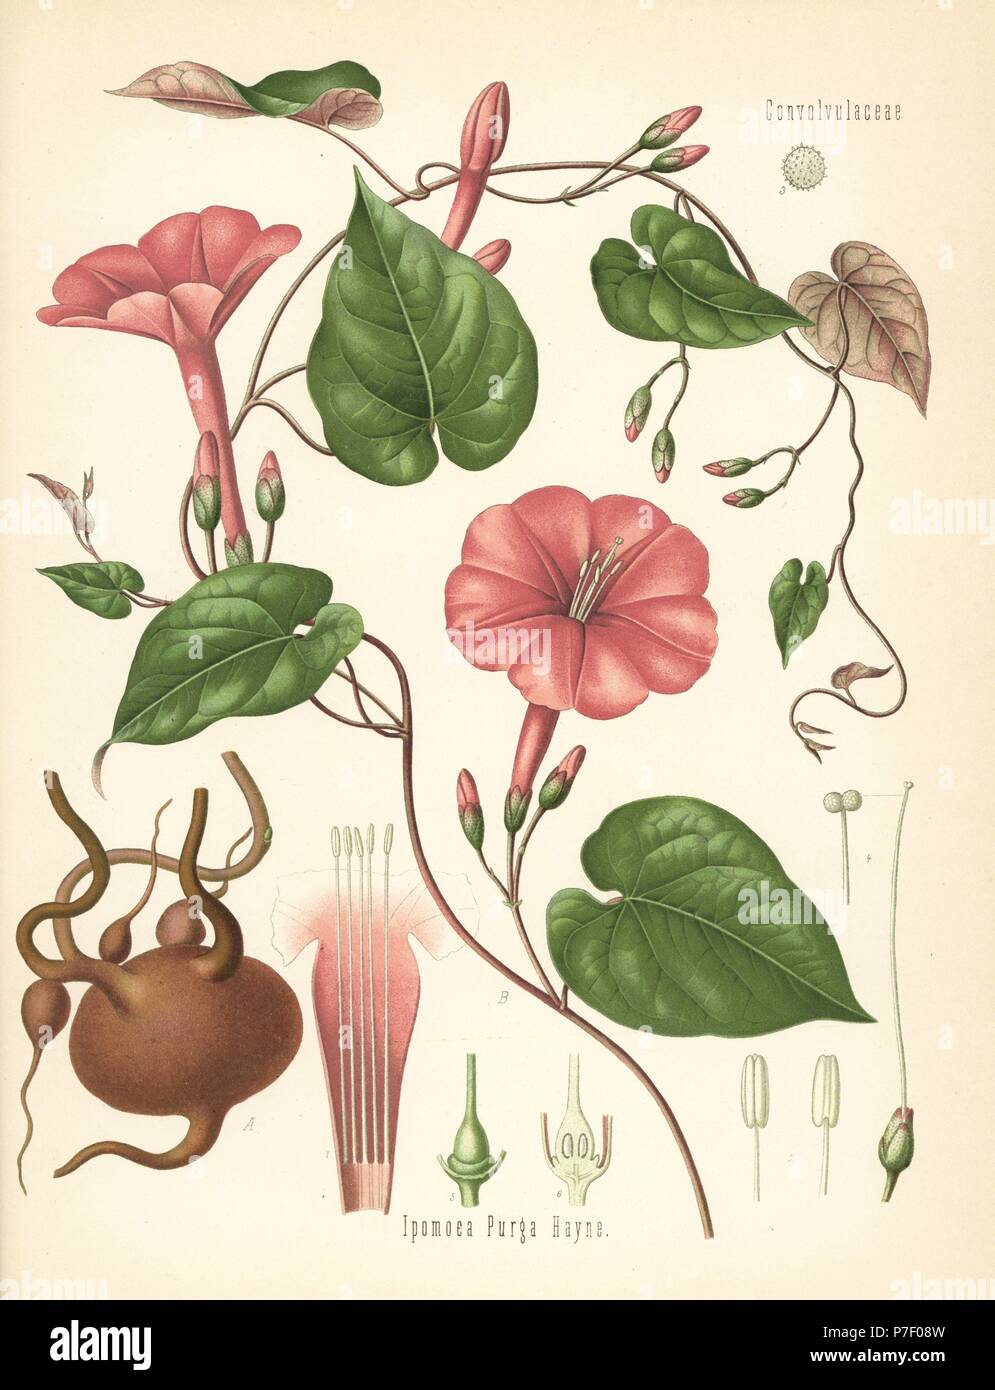 Jalap, Ipomoea purga. Chromolithograph after a botanical illustration from Hermann Adolph Koehler's Medicinal Plants, edited by Gustav Pabst, Koehler, Germany, 1887. Stock Photo